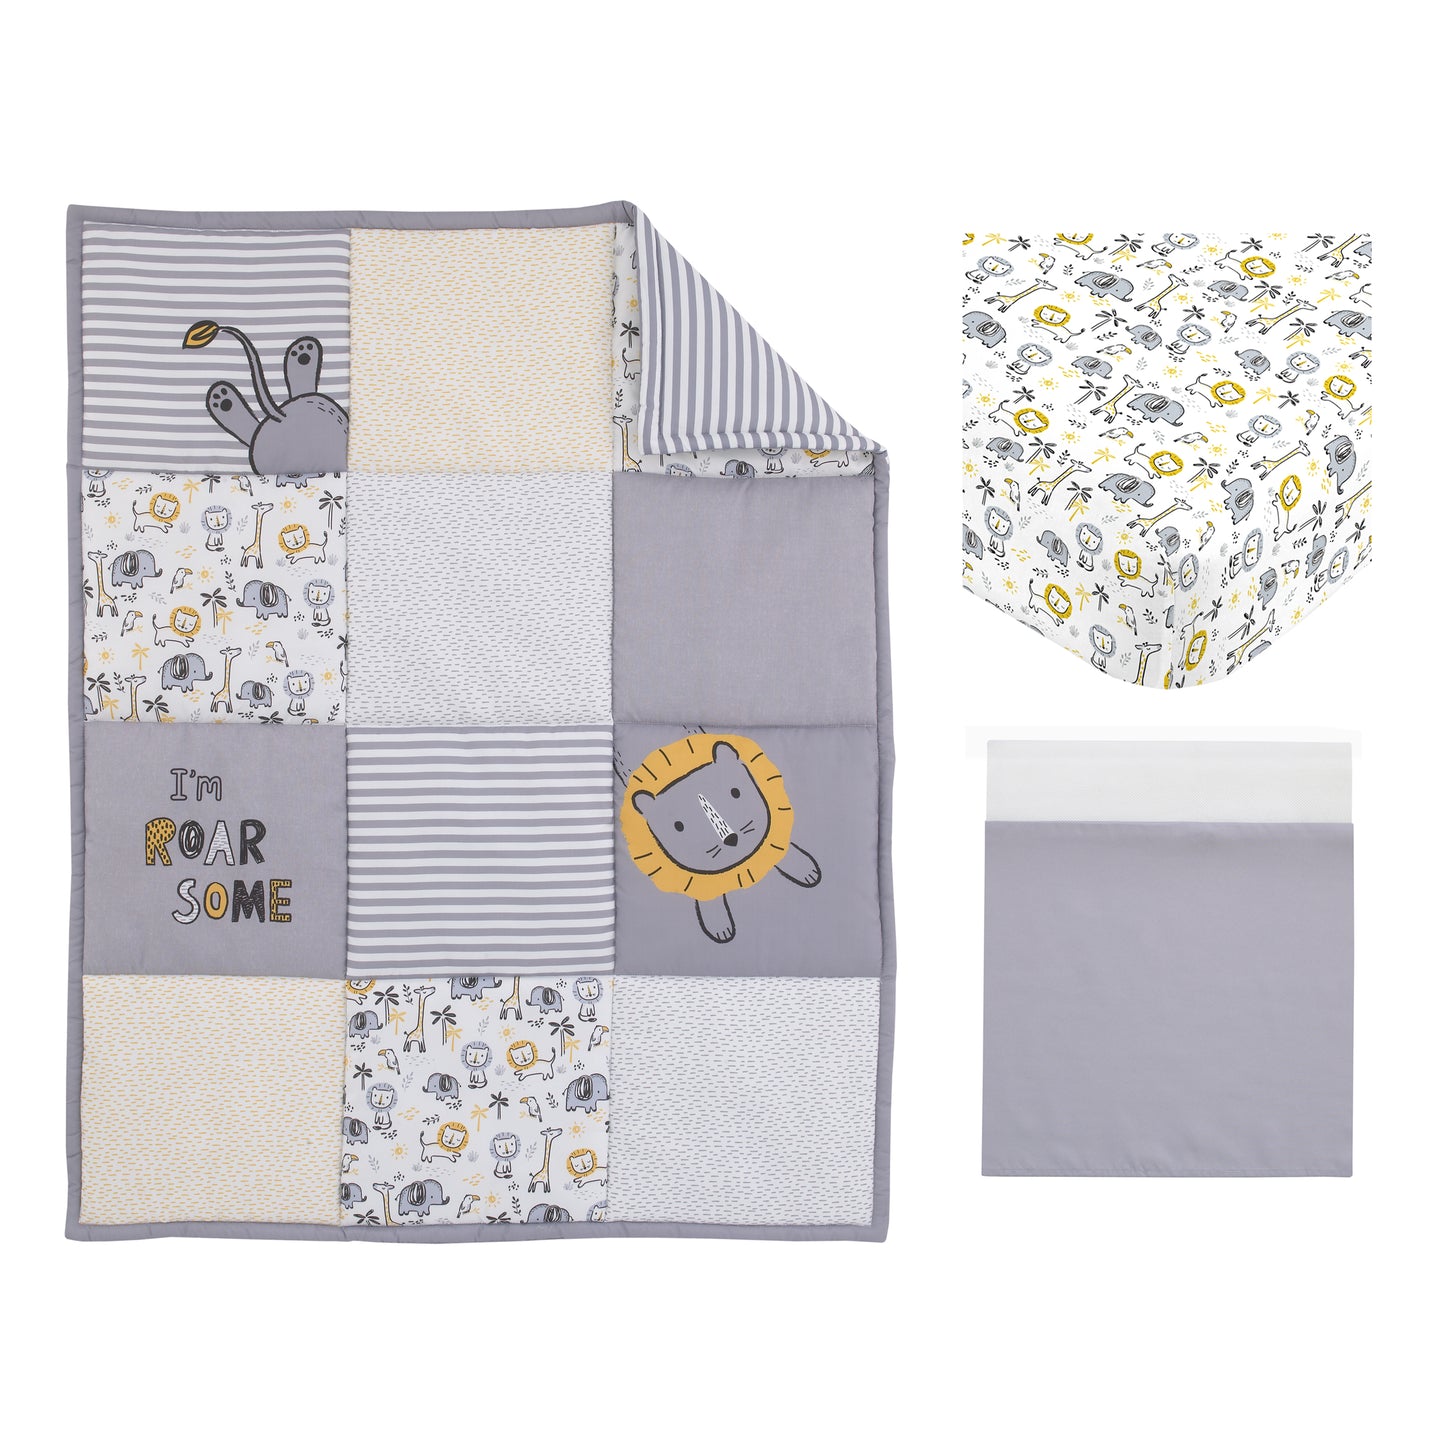 Little Love by NoJo Roarsome Lion - Grey, Yellow, White 3 Piece Nursery Crib Bedding Set with Comforter, Fitted Crib Sheet, Dust Ruffle